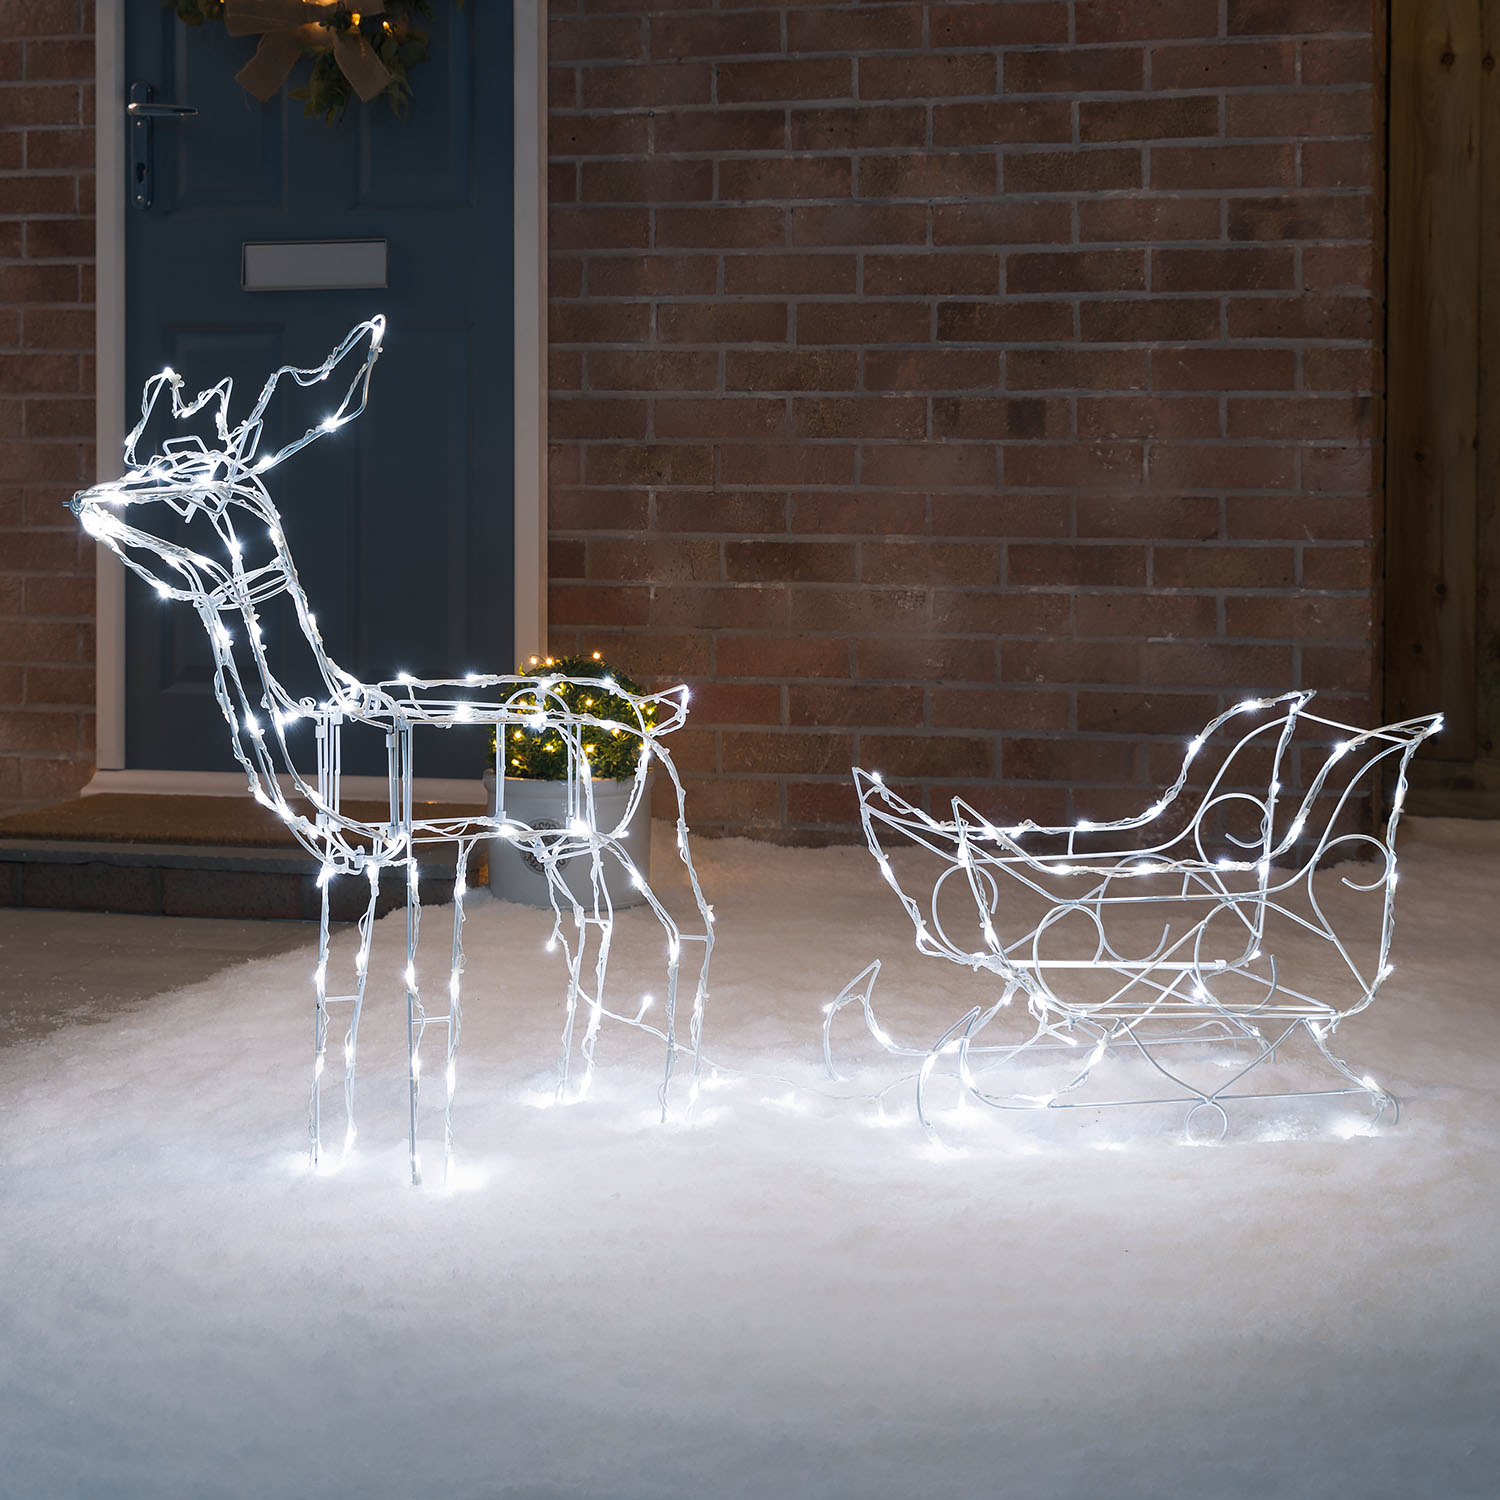 607476_3D_grazing_wire_reindeer_with_sleigh_white_lifestyle_1